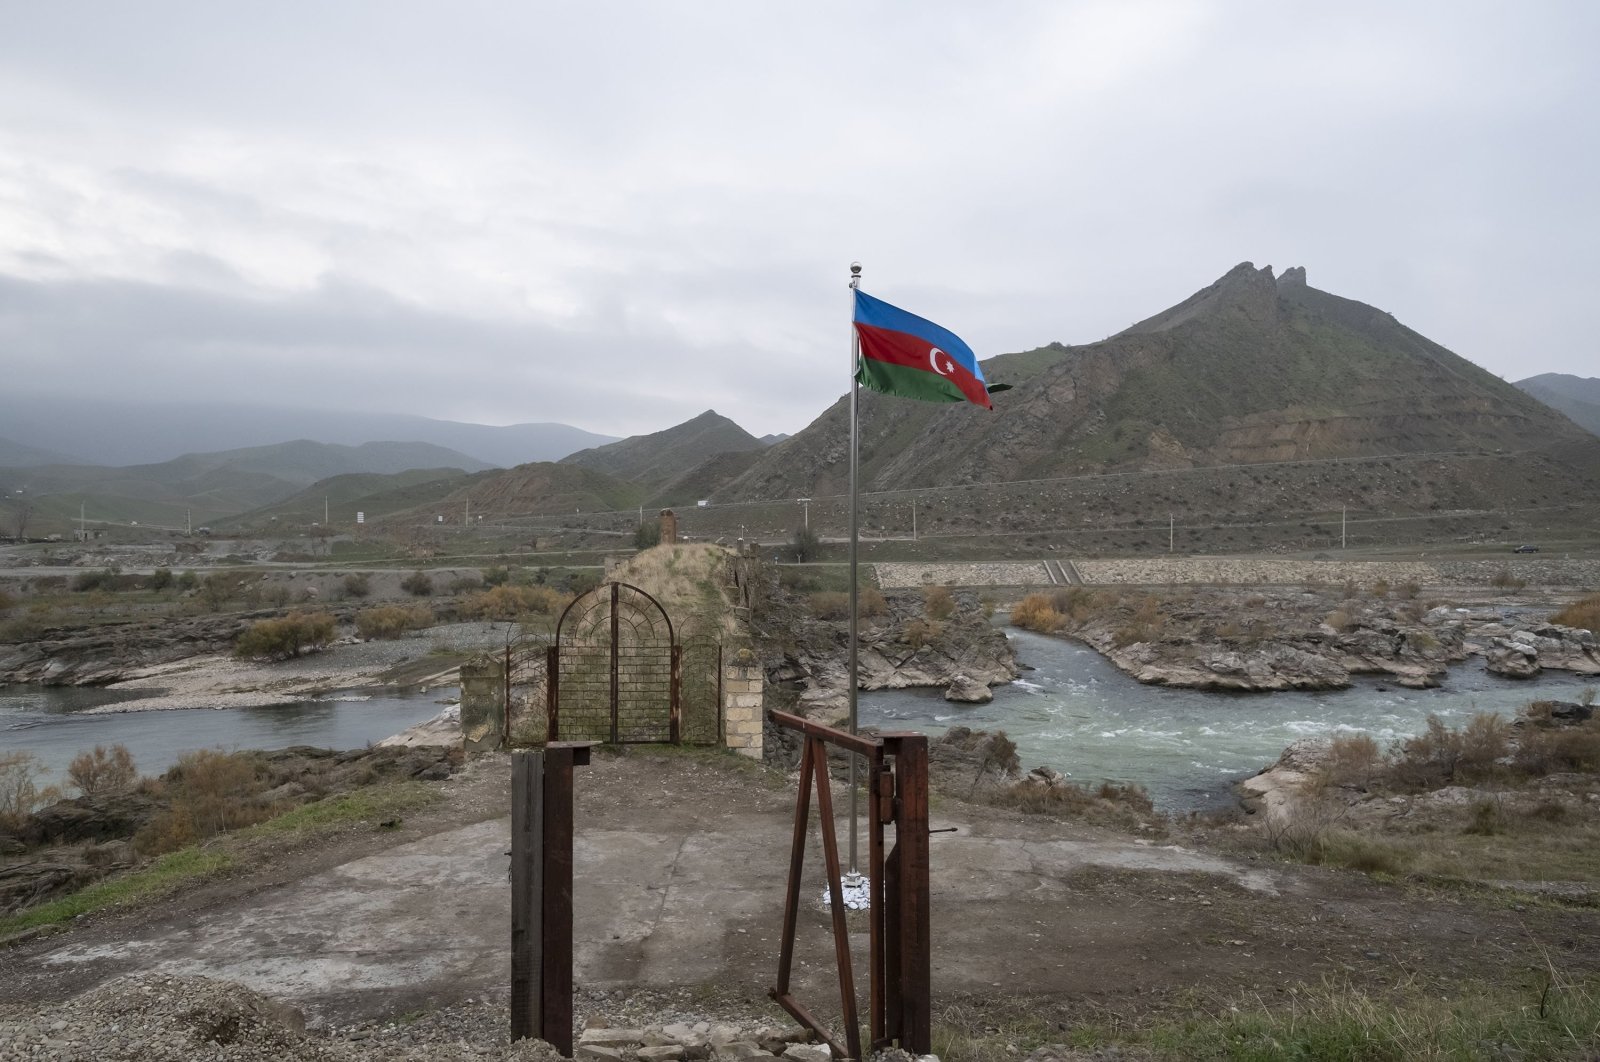 An Azerbaijani national flag flies next to the 13th century Khodaafarin Arch Bridge connecting the northern and southern banks of the Aras River located at the border of Azerbaijan and Iran, Dec. 15, 2020. (Getty Images Photo)